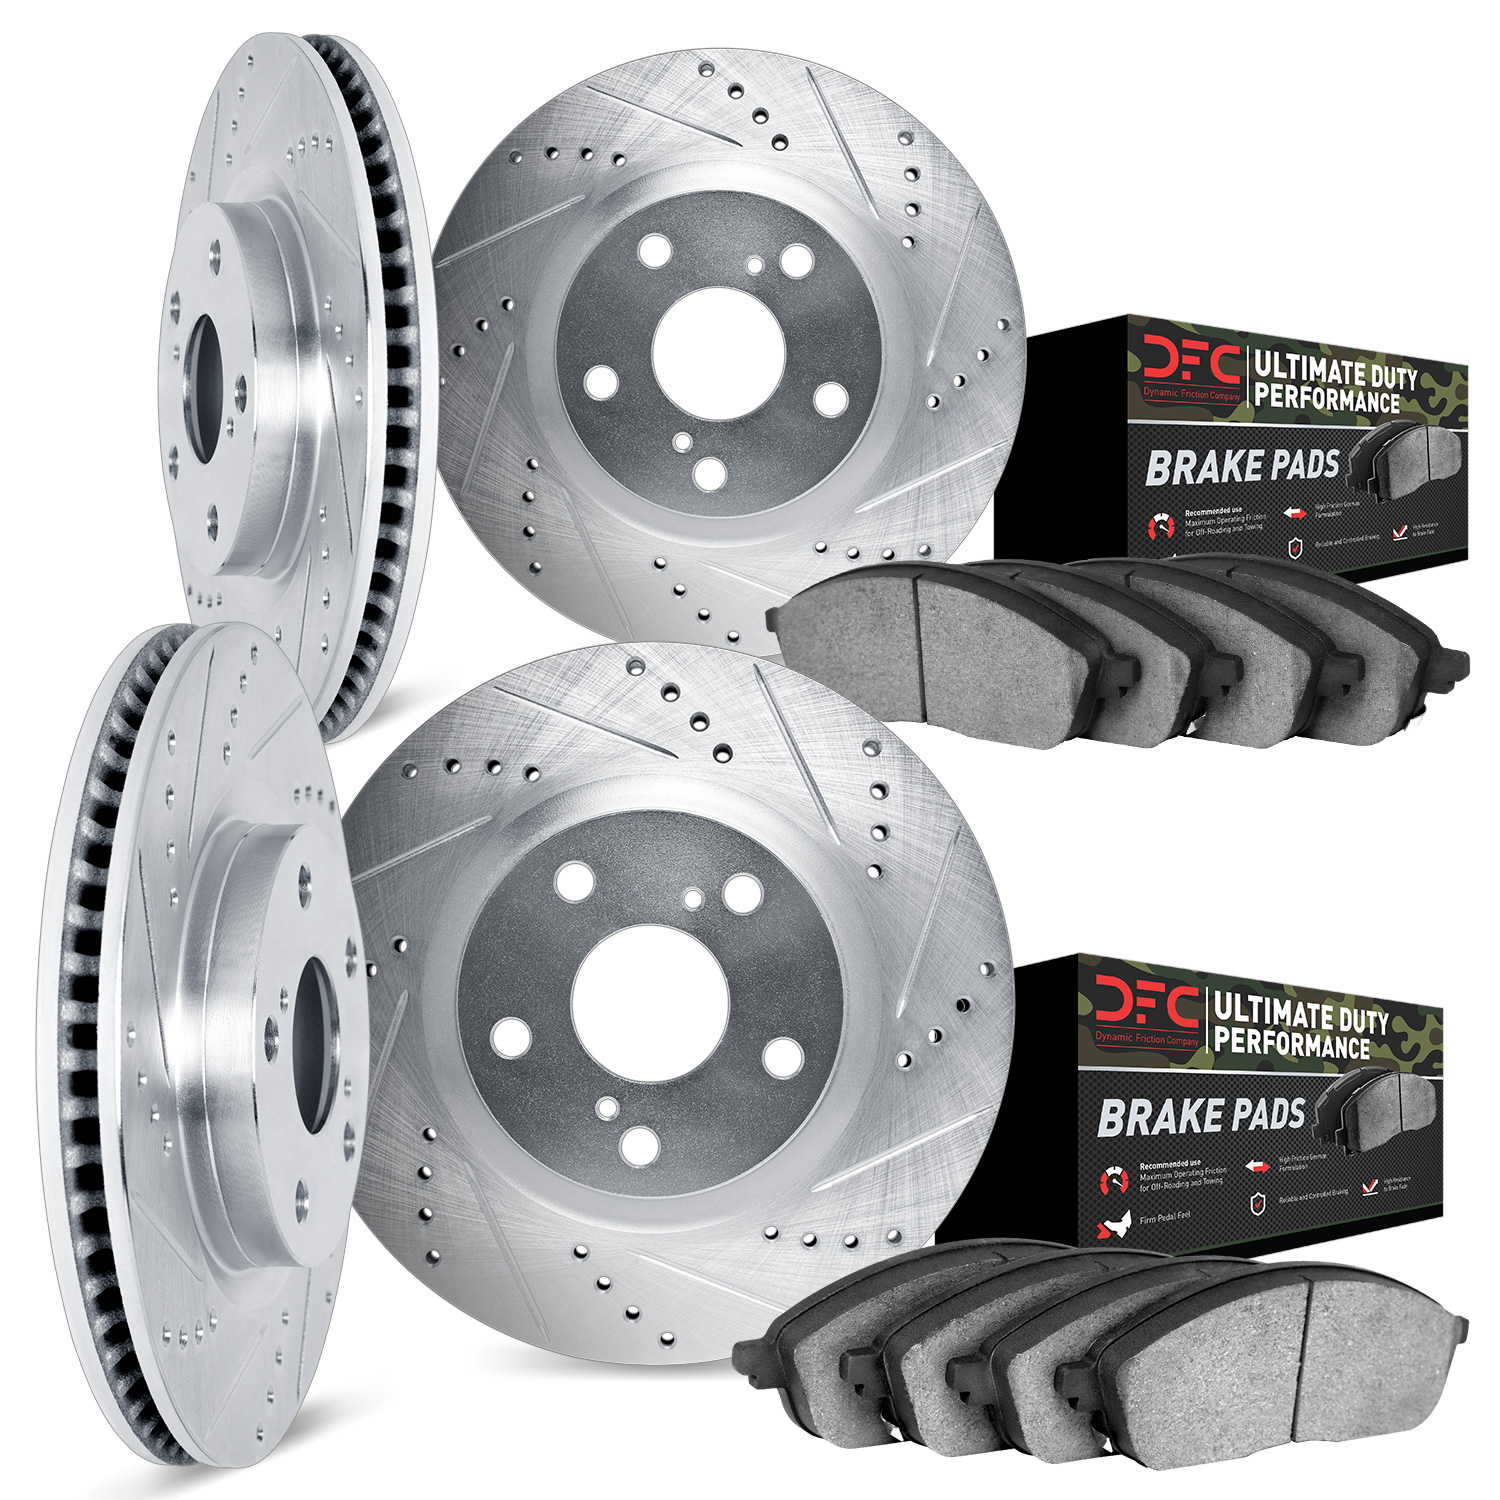 7404-45001 Drilled/Slotted Brake Rotors with Ultimate-Duty Brake Pads Kit [Silver], 2010-2015 GM, Position: Front and Rear